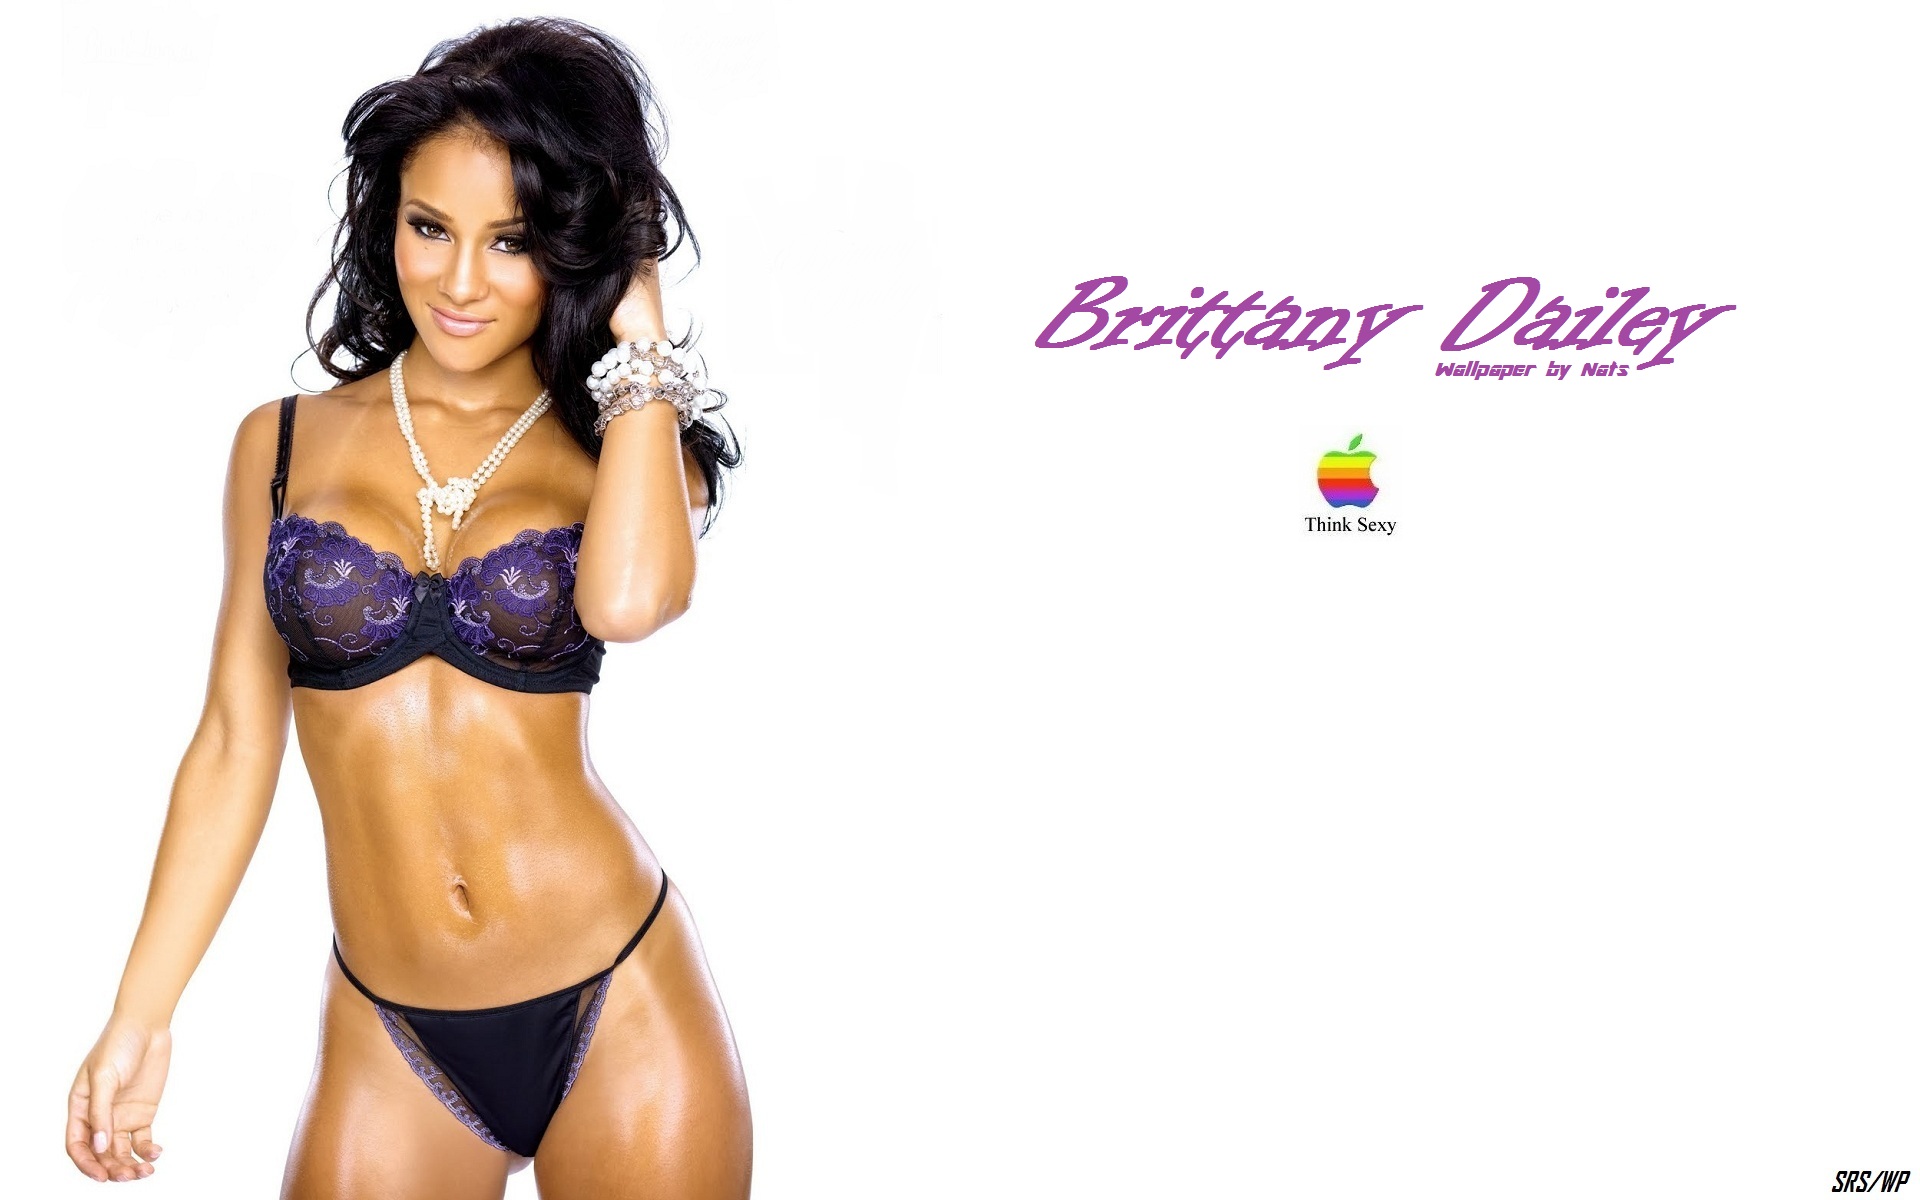 Download HQ Brittany Dailey wallpaper / Celebrities Female / 1920x1200